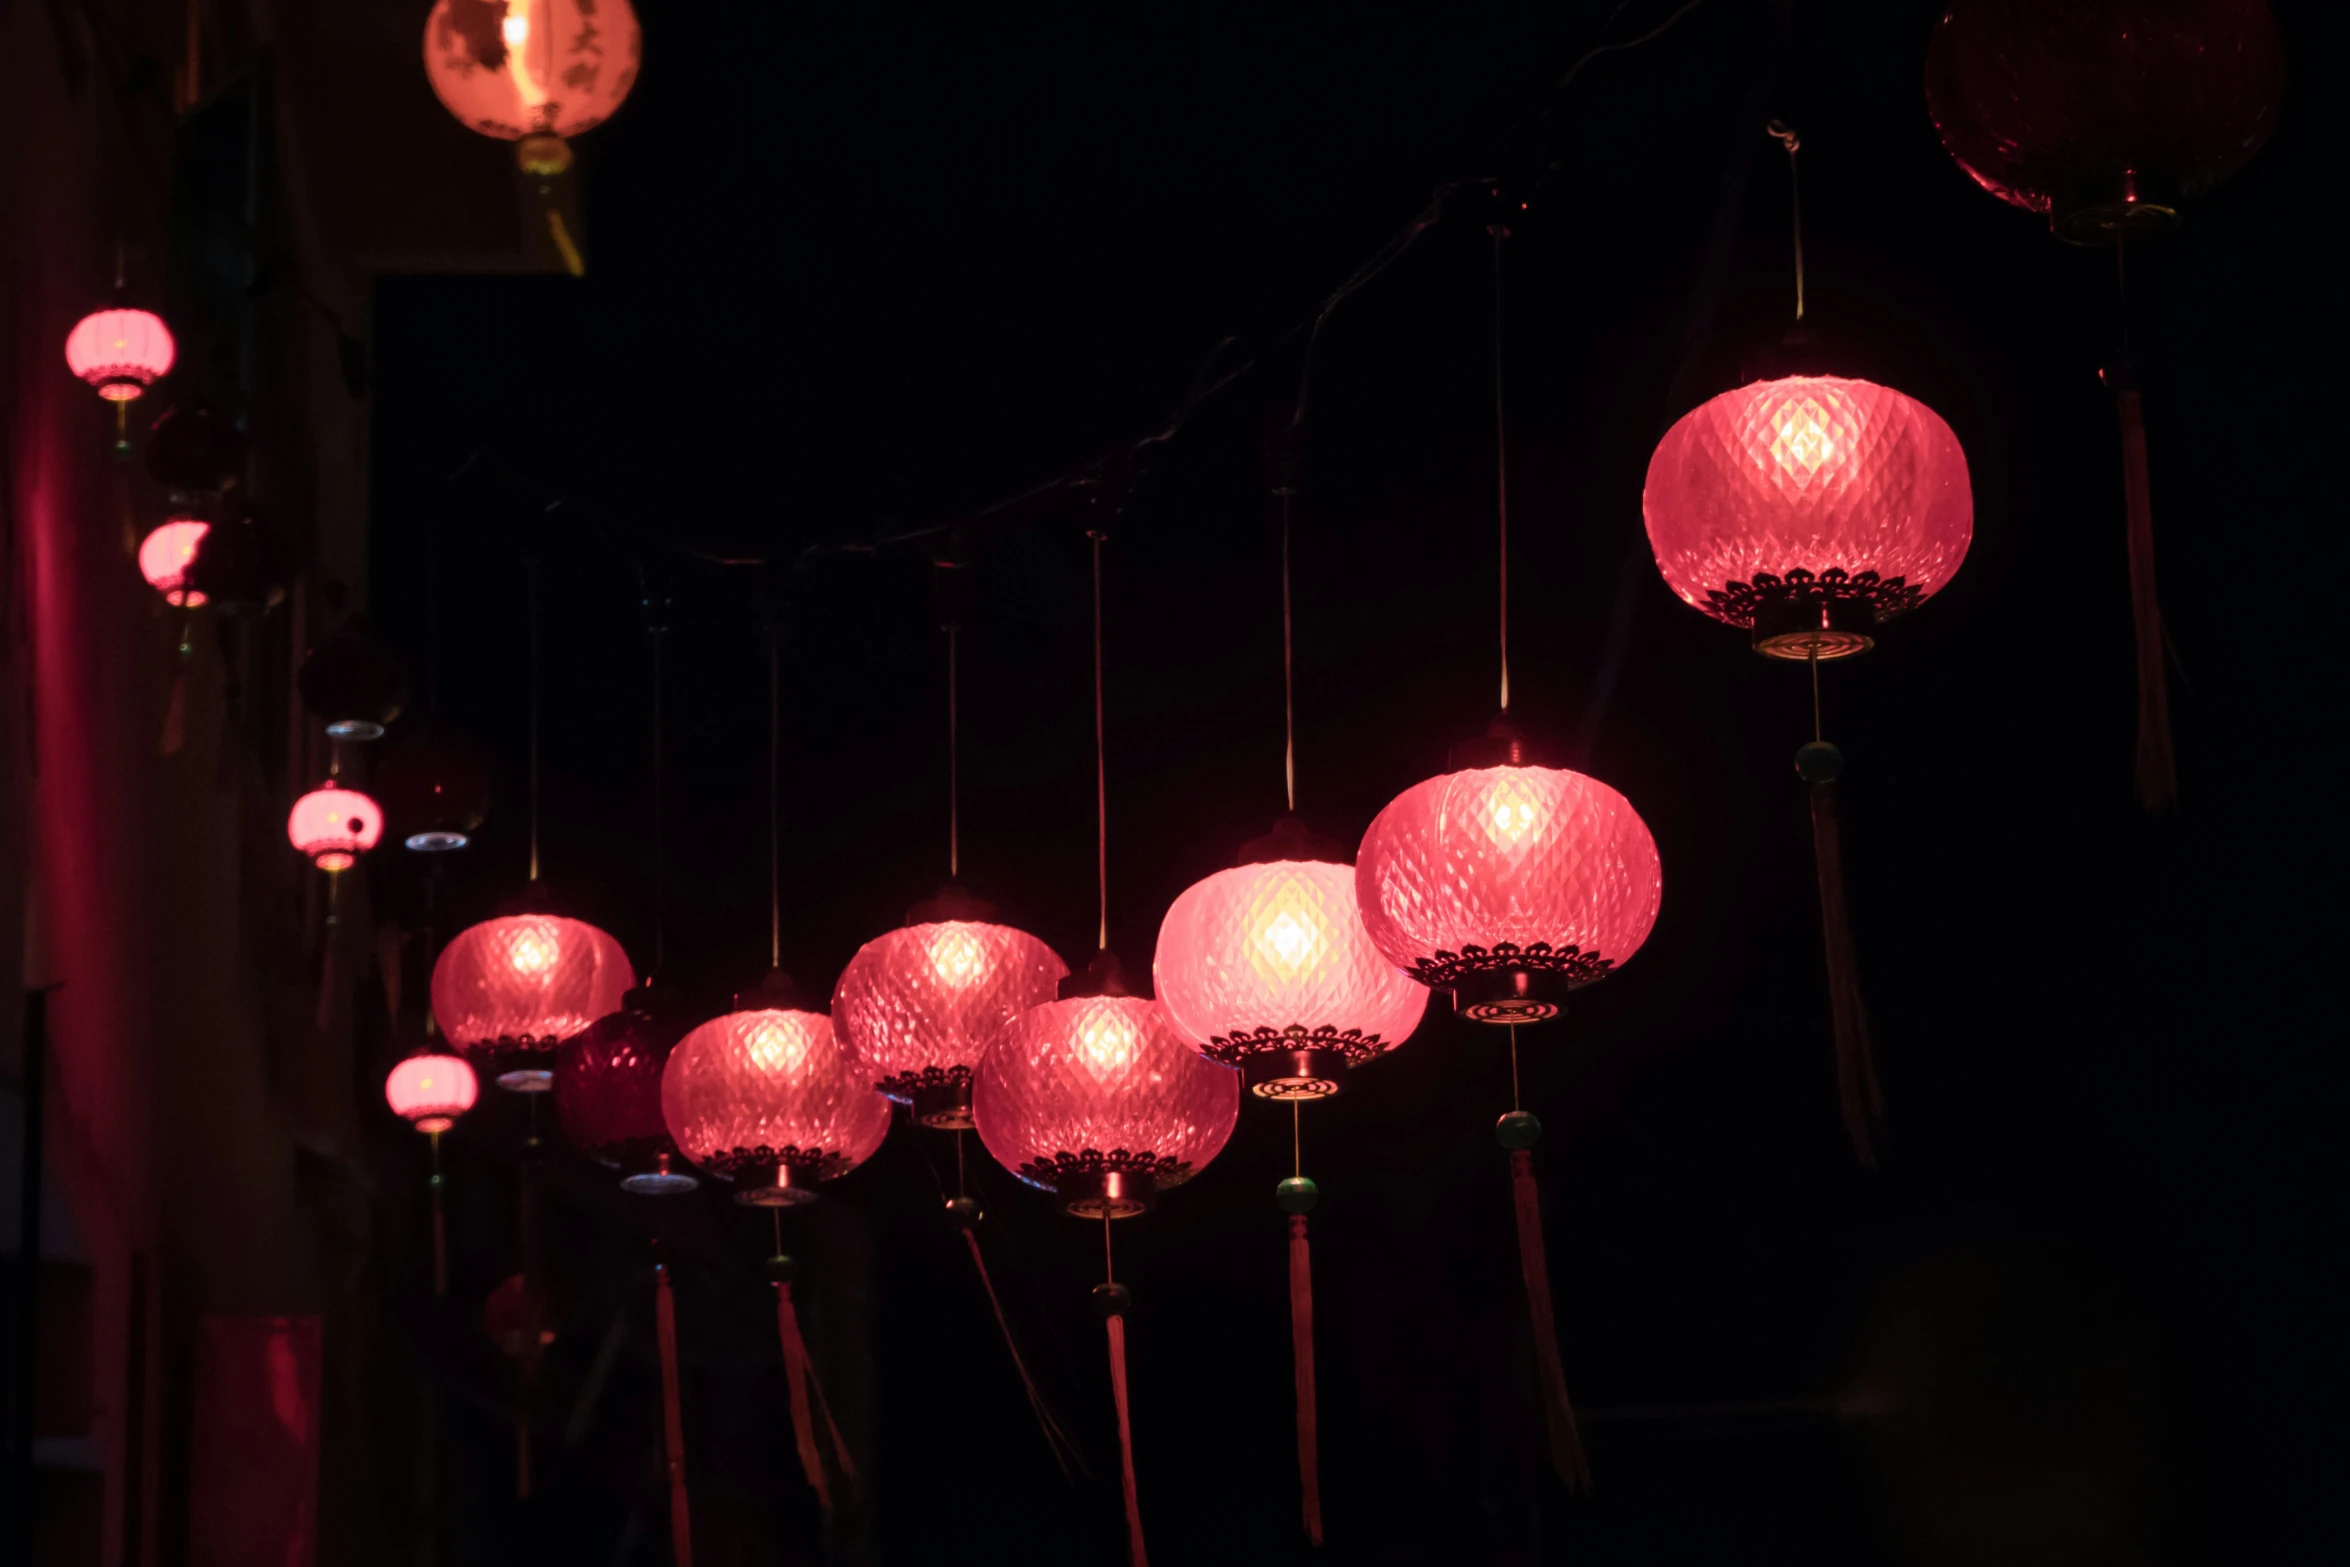 many lanterns lit up in the dark, with a wall in the background